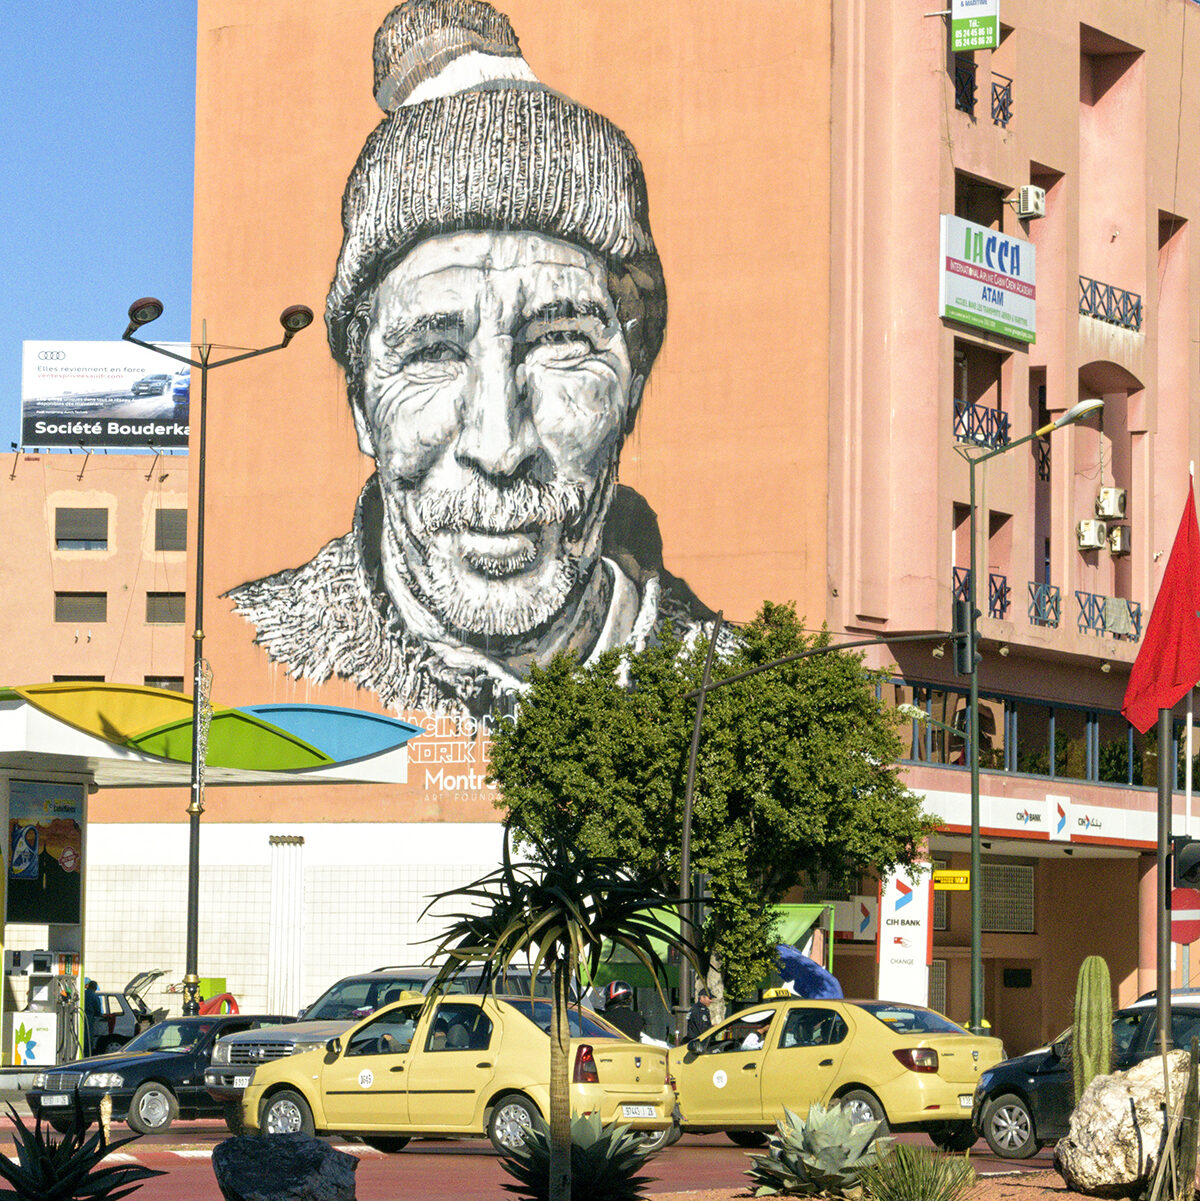 Giant mural of a local man's face on a building in Marrakech, with taxis and palms in the foreground.